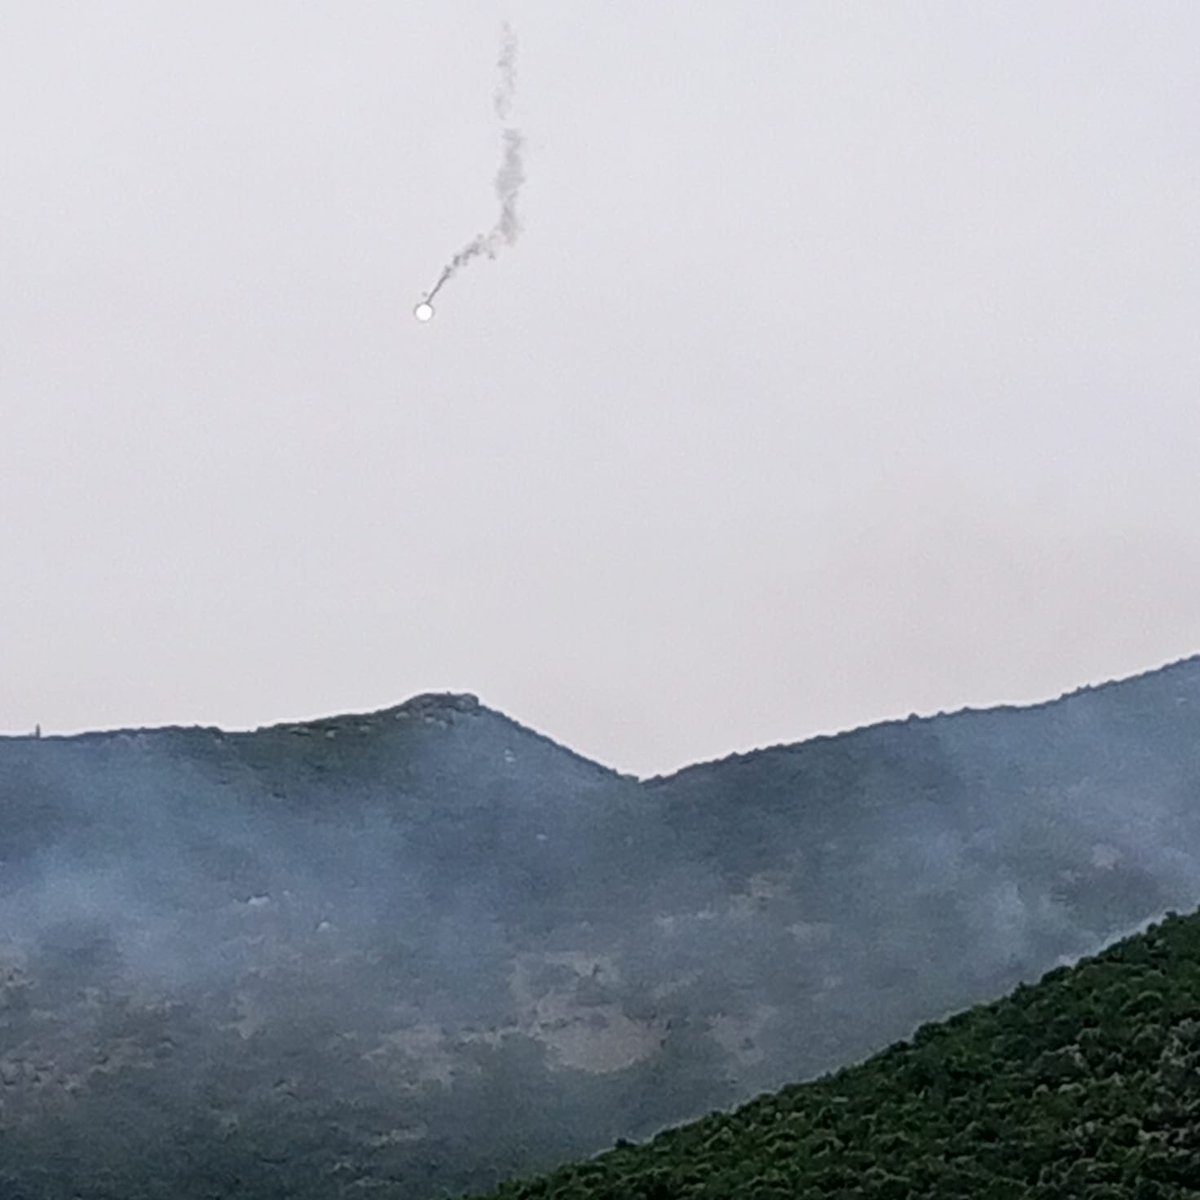 The Israeli army is targeting the outskirts of Halta and Kafrshuba with white phosphorus shells and flares in order to set fire to the wooded areas in the region